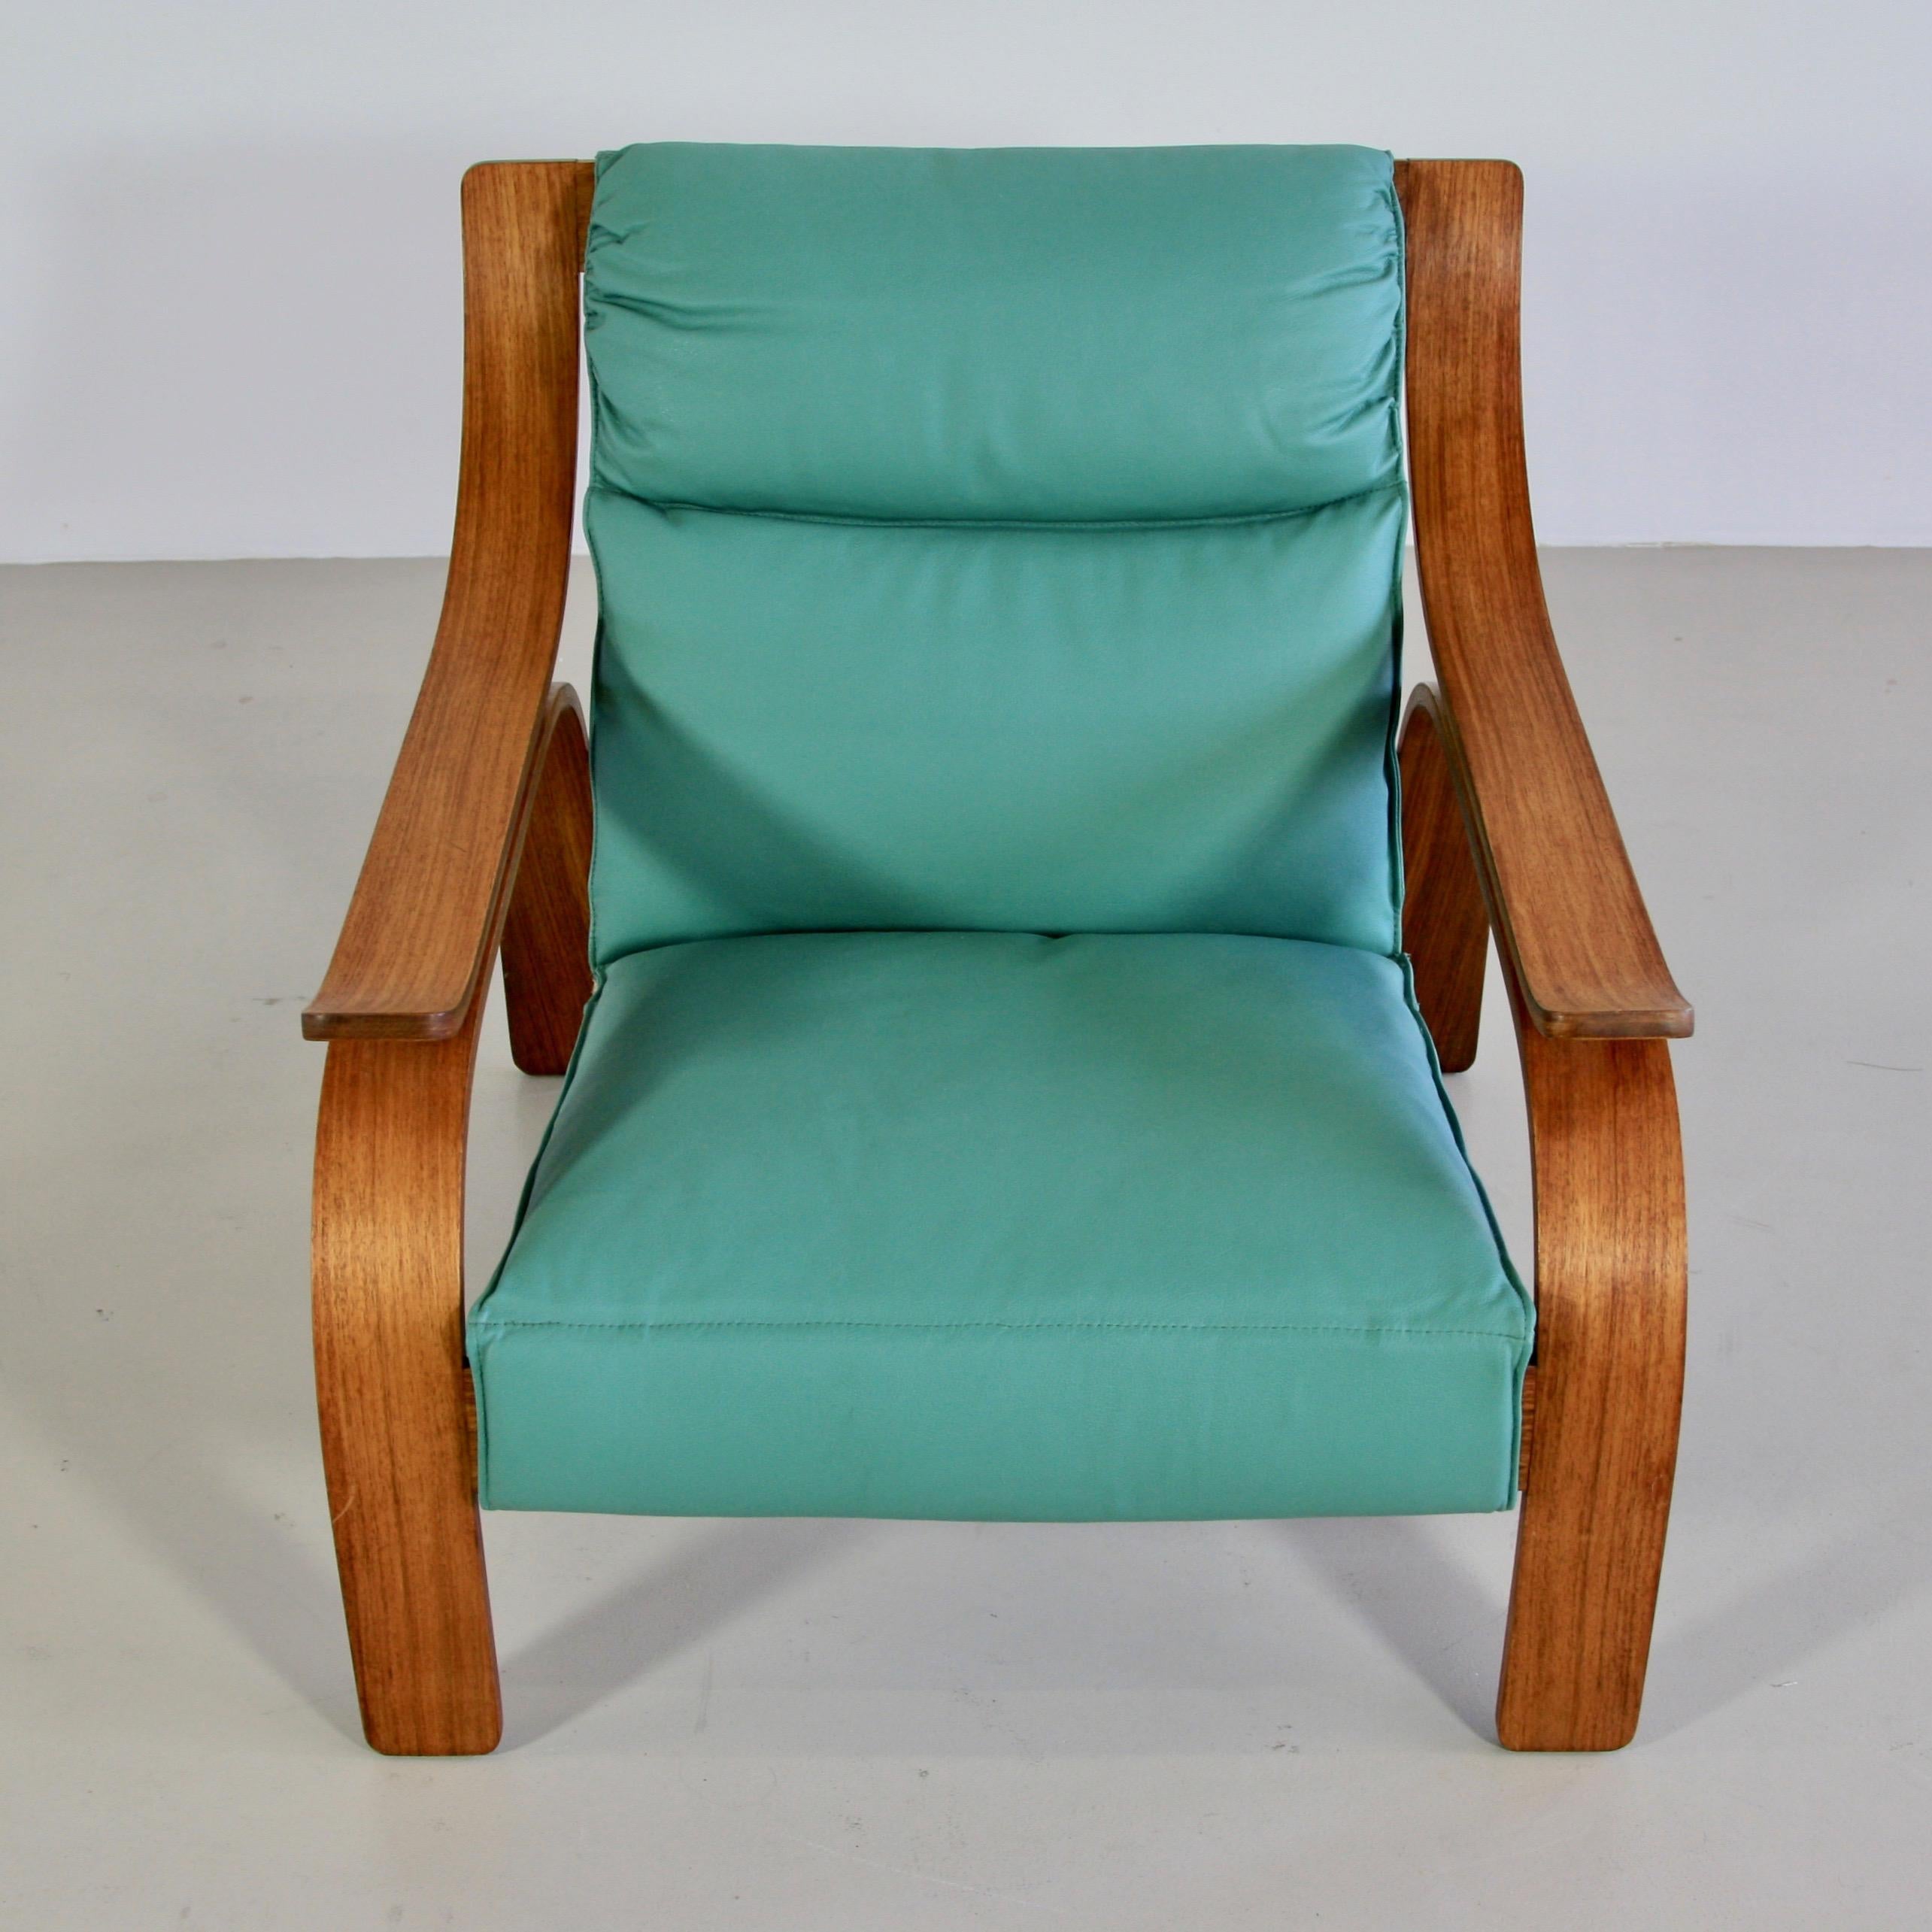 Italian Pair of Green Leather Armchairs by Marco Zanuso, 1964 For Sale